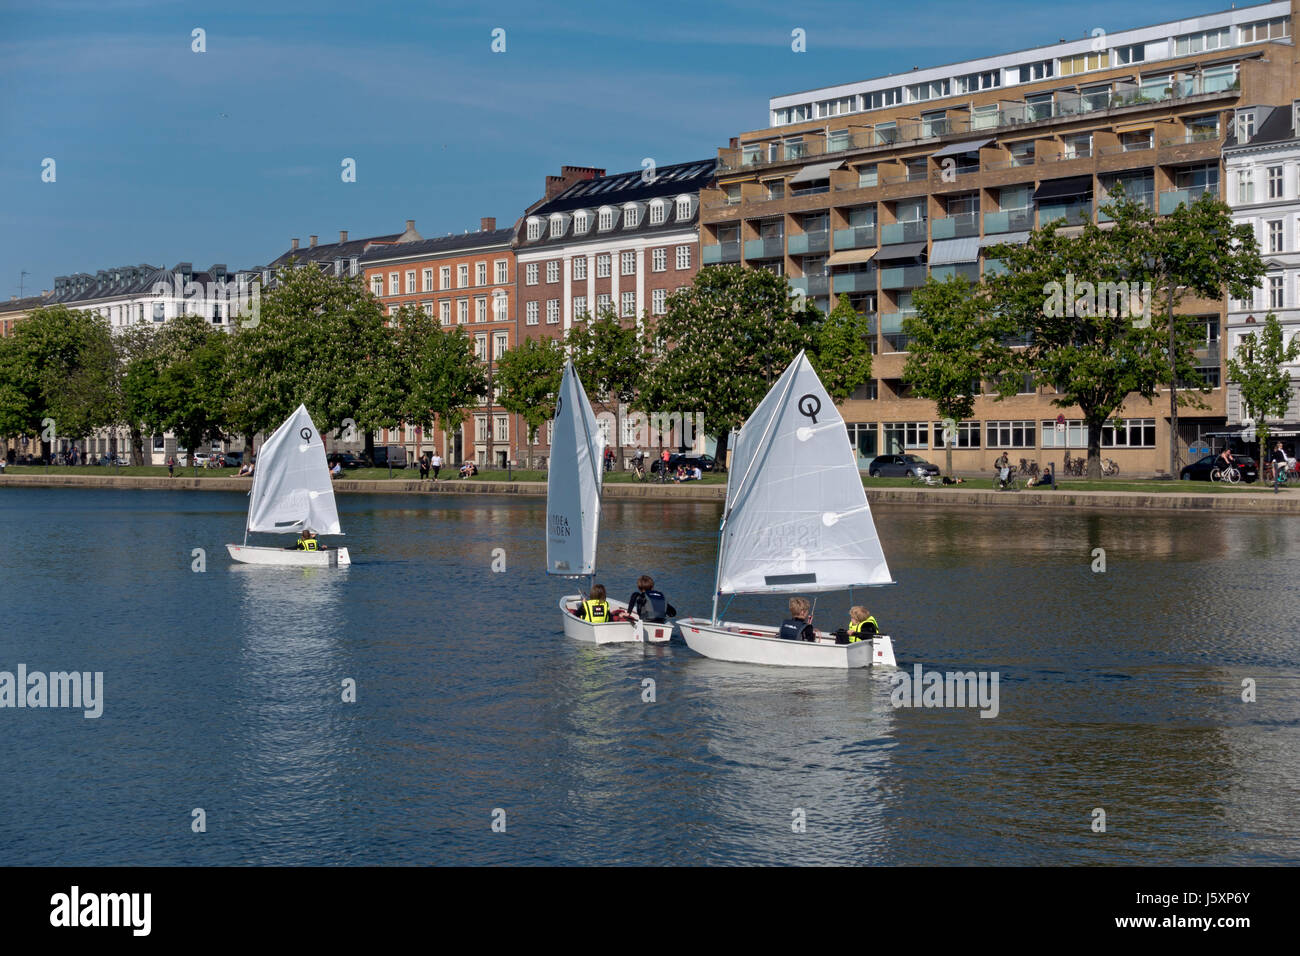 Junior sailors in optimist dinghies on the Peblinge Lake in central Copenhagen on a sunny afternoon late spring early summer. Stock Photo